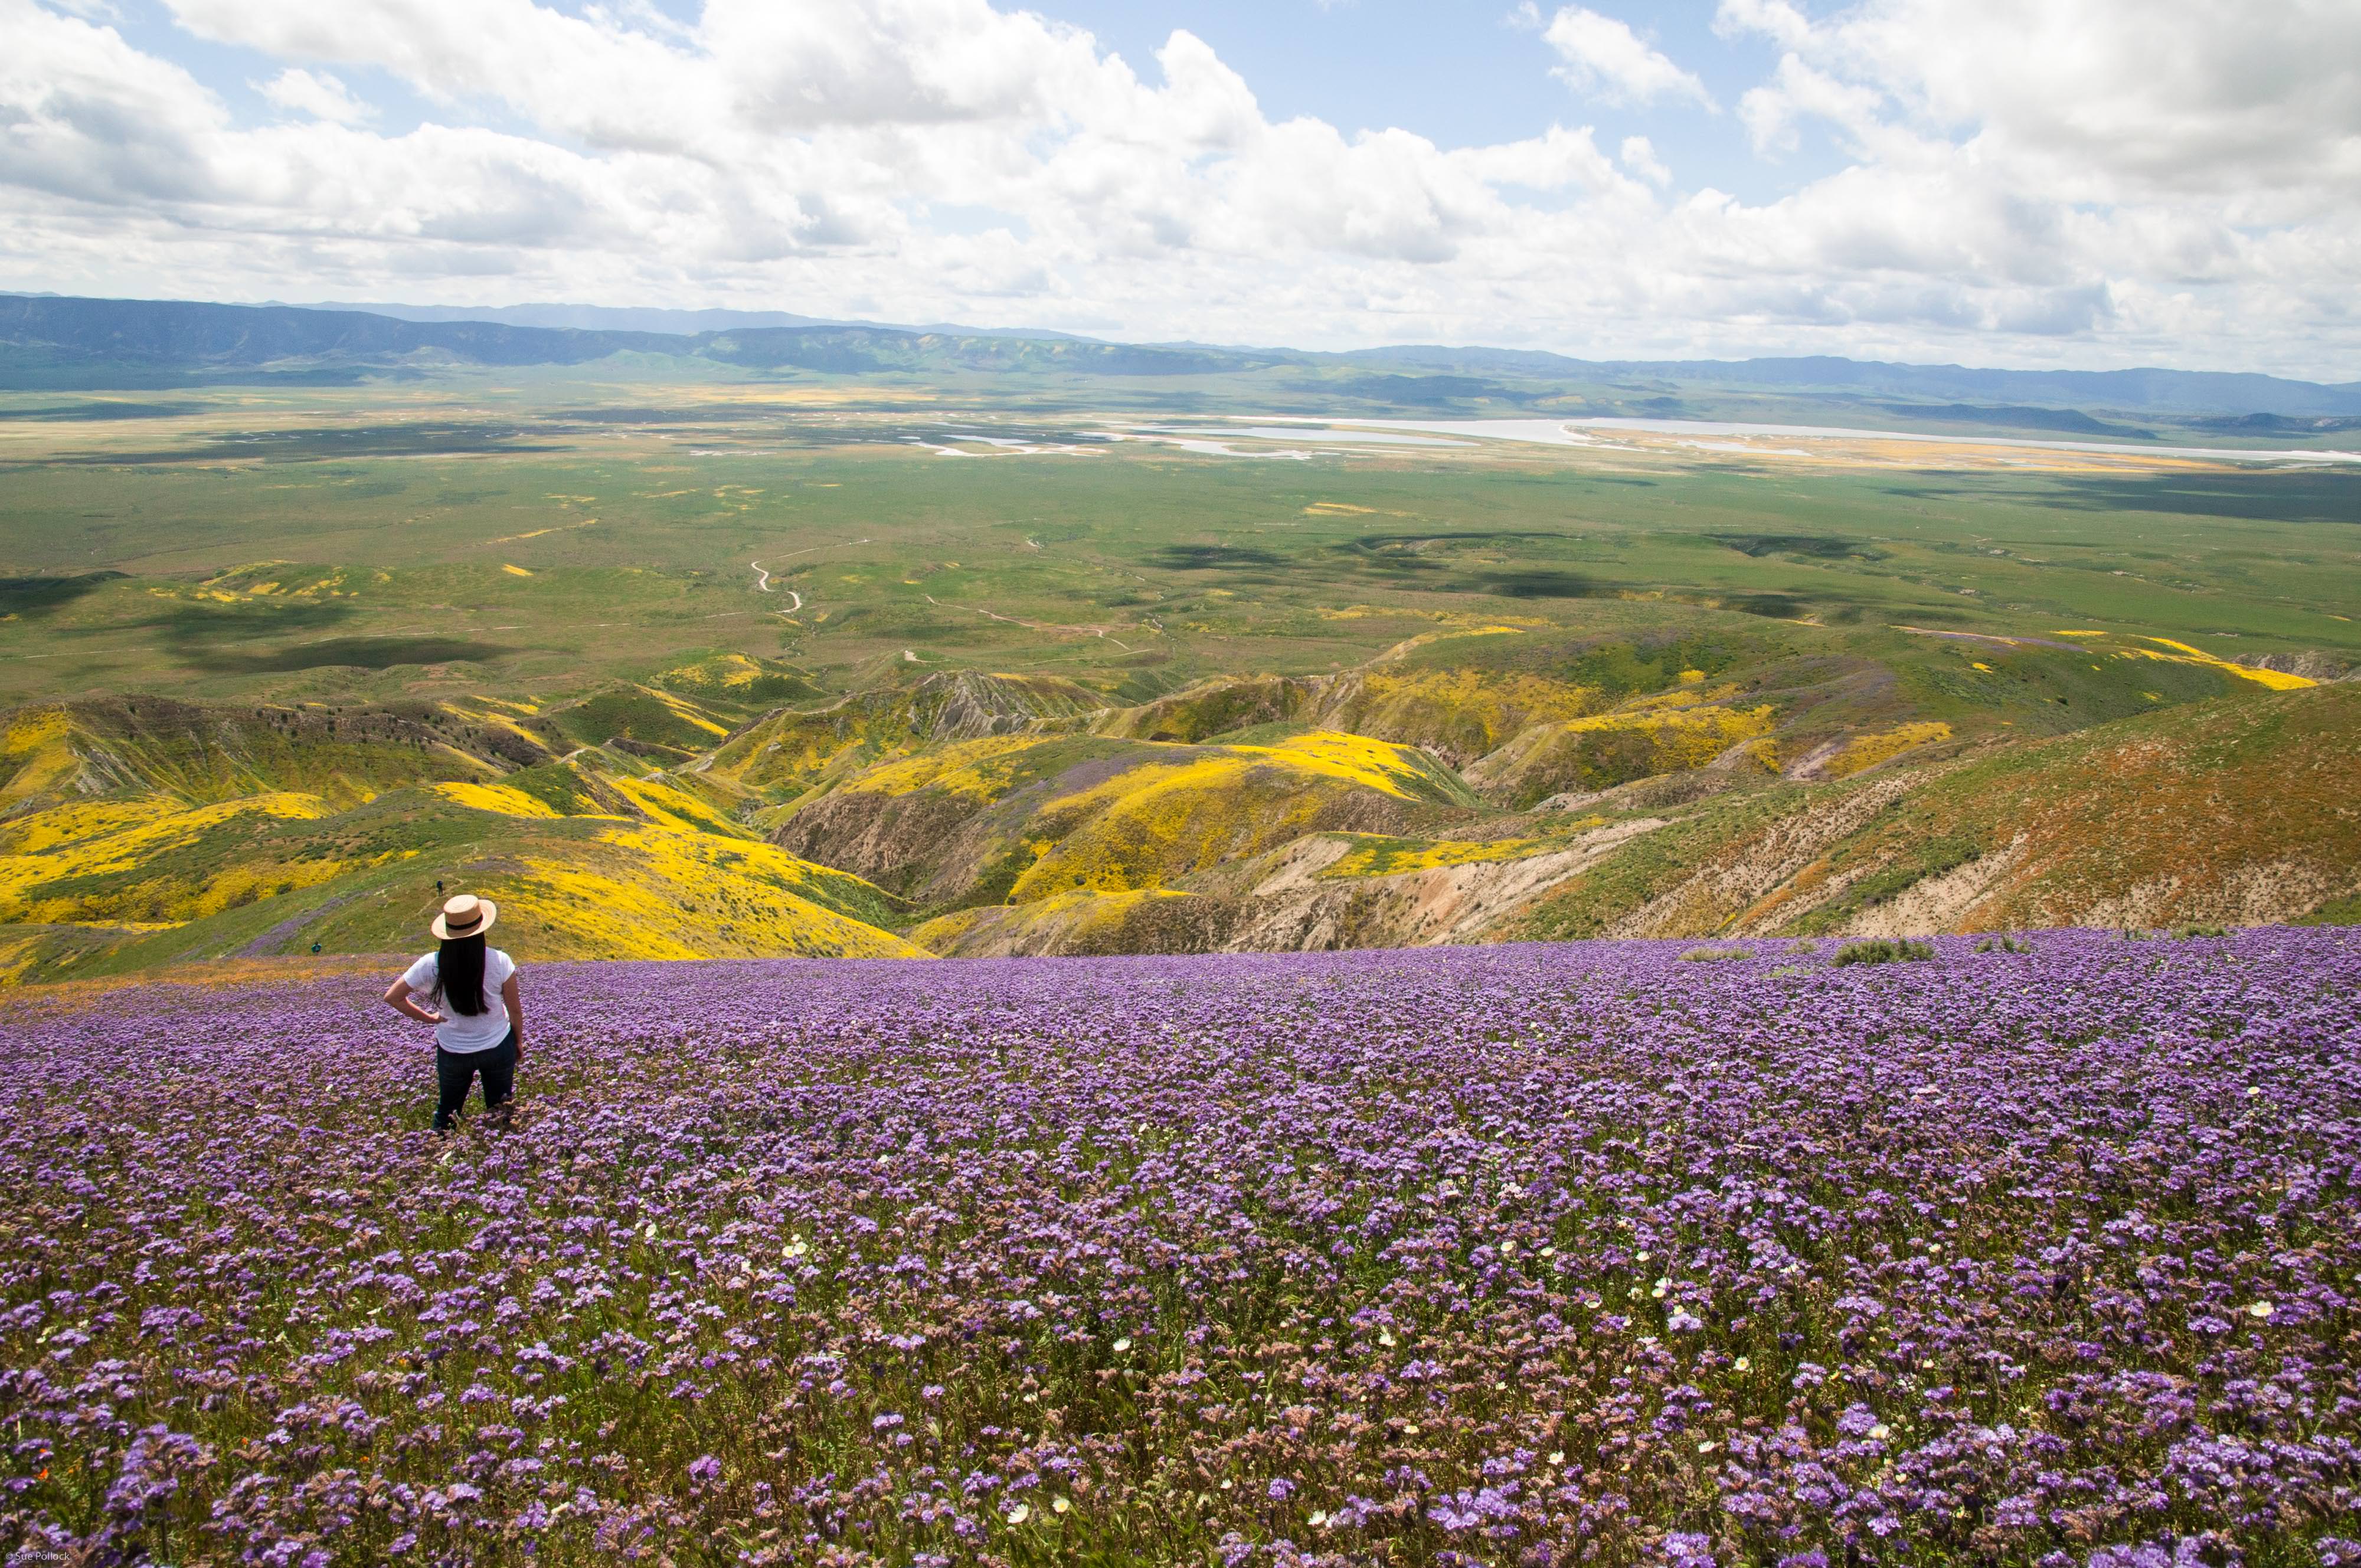 A woman stands in a field of purple flowers looking out over a broad, green sloping plain.